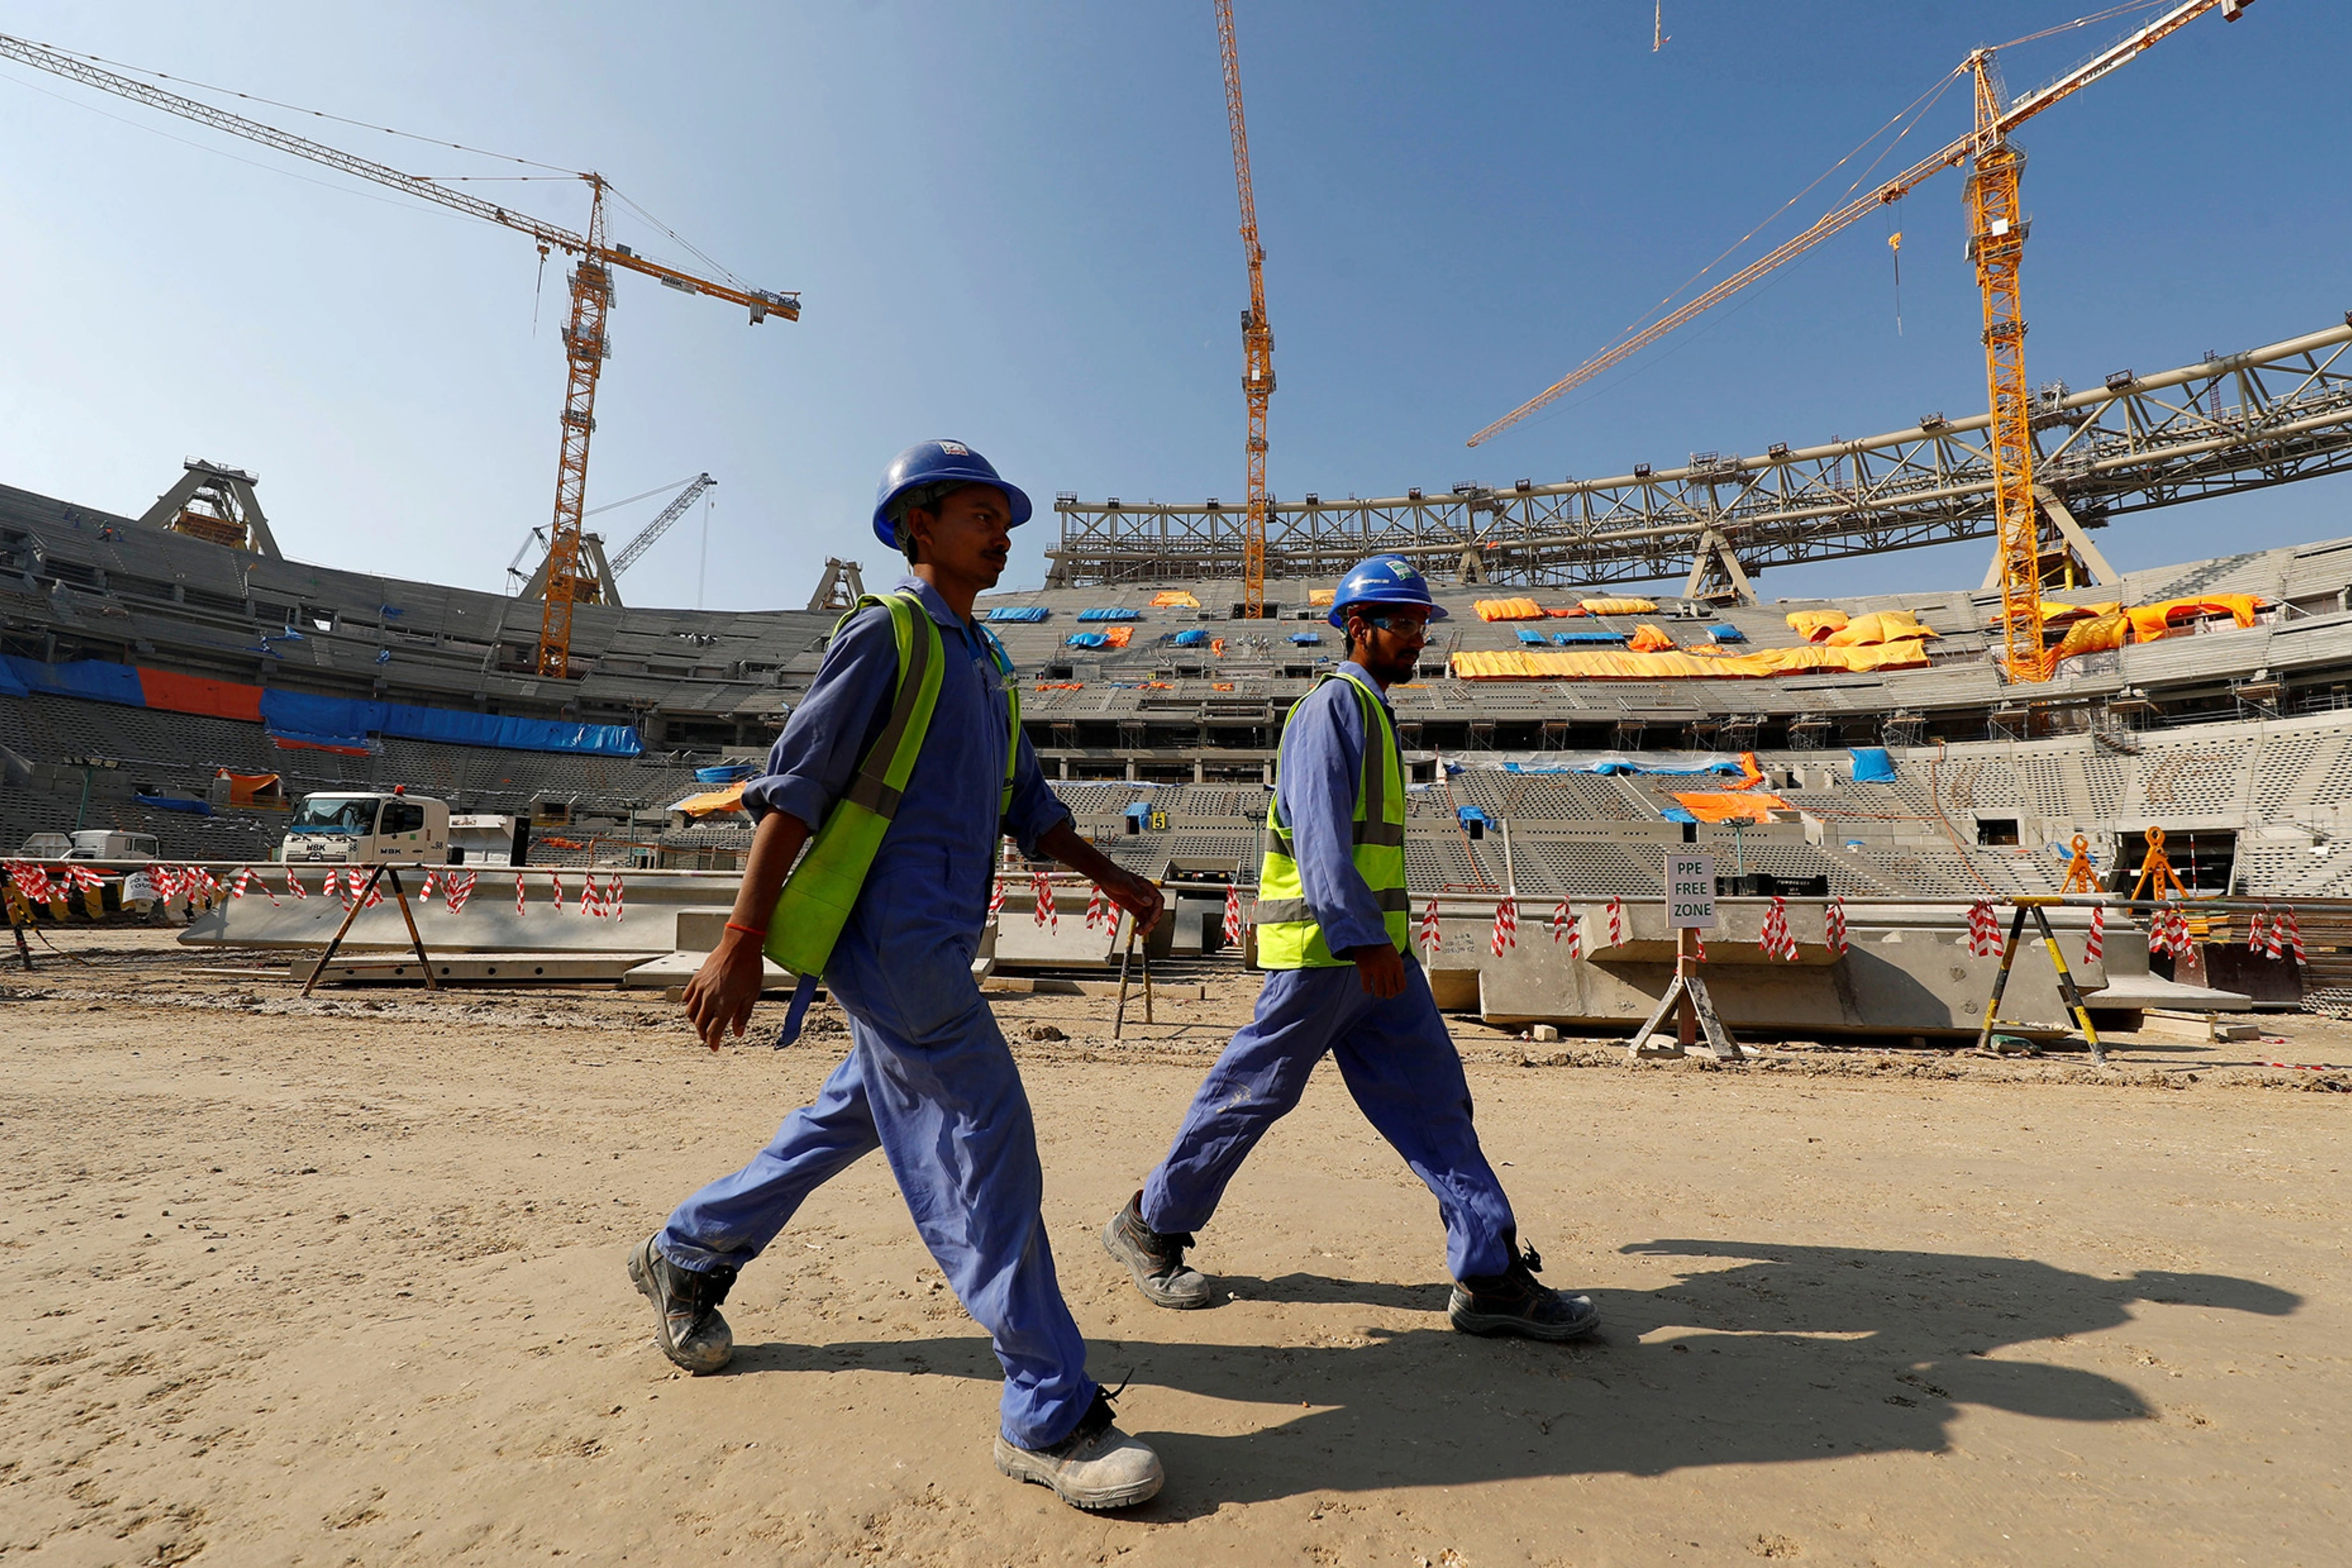 Workers construct the Lusail National Stadium for the 2022 FIFA World Cup in Doha, Qatar.